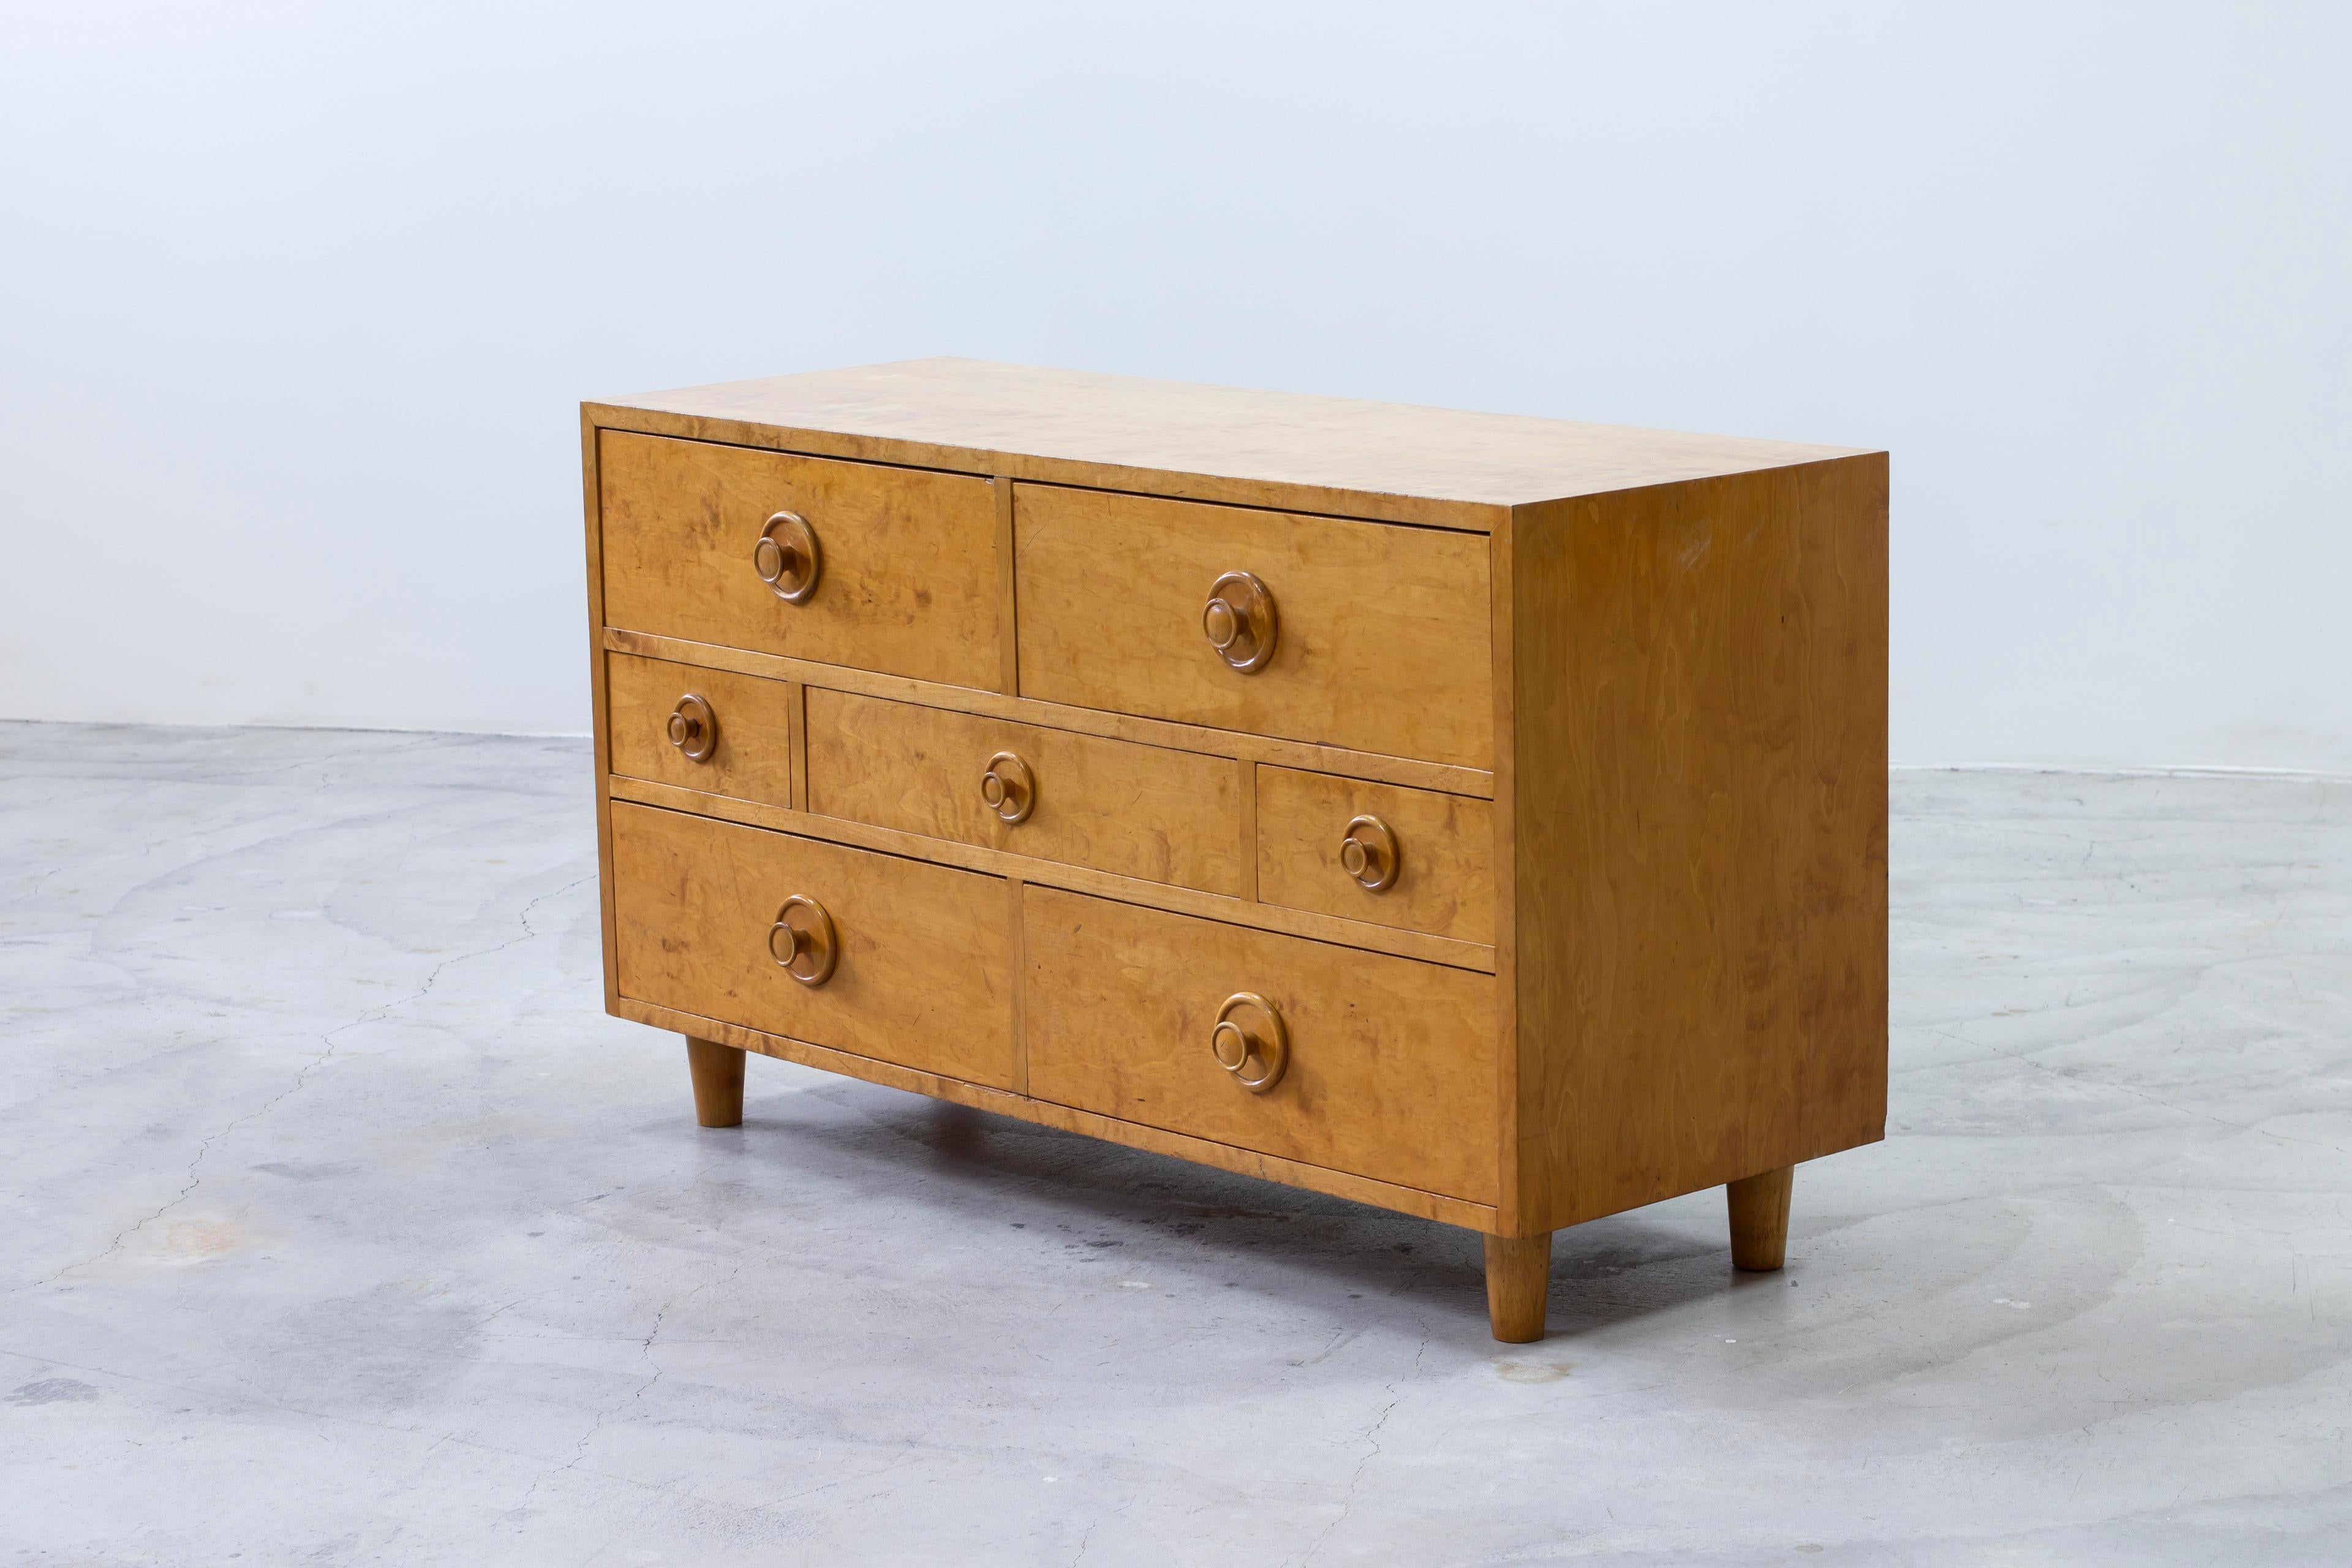 Exceptional Swedish modern chest of drawers. Made from birch with lovely honey tone. Made by unknown designer and Swedish cabinetmaker during the 1930-40s. Seven drawers with oversized round handles. Good vintage condition with some age related wear